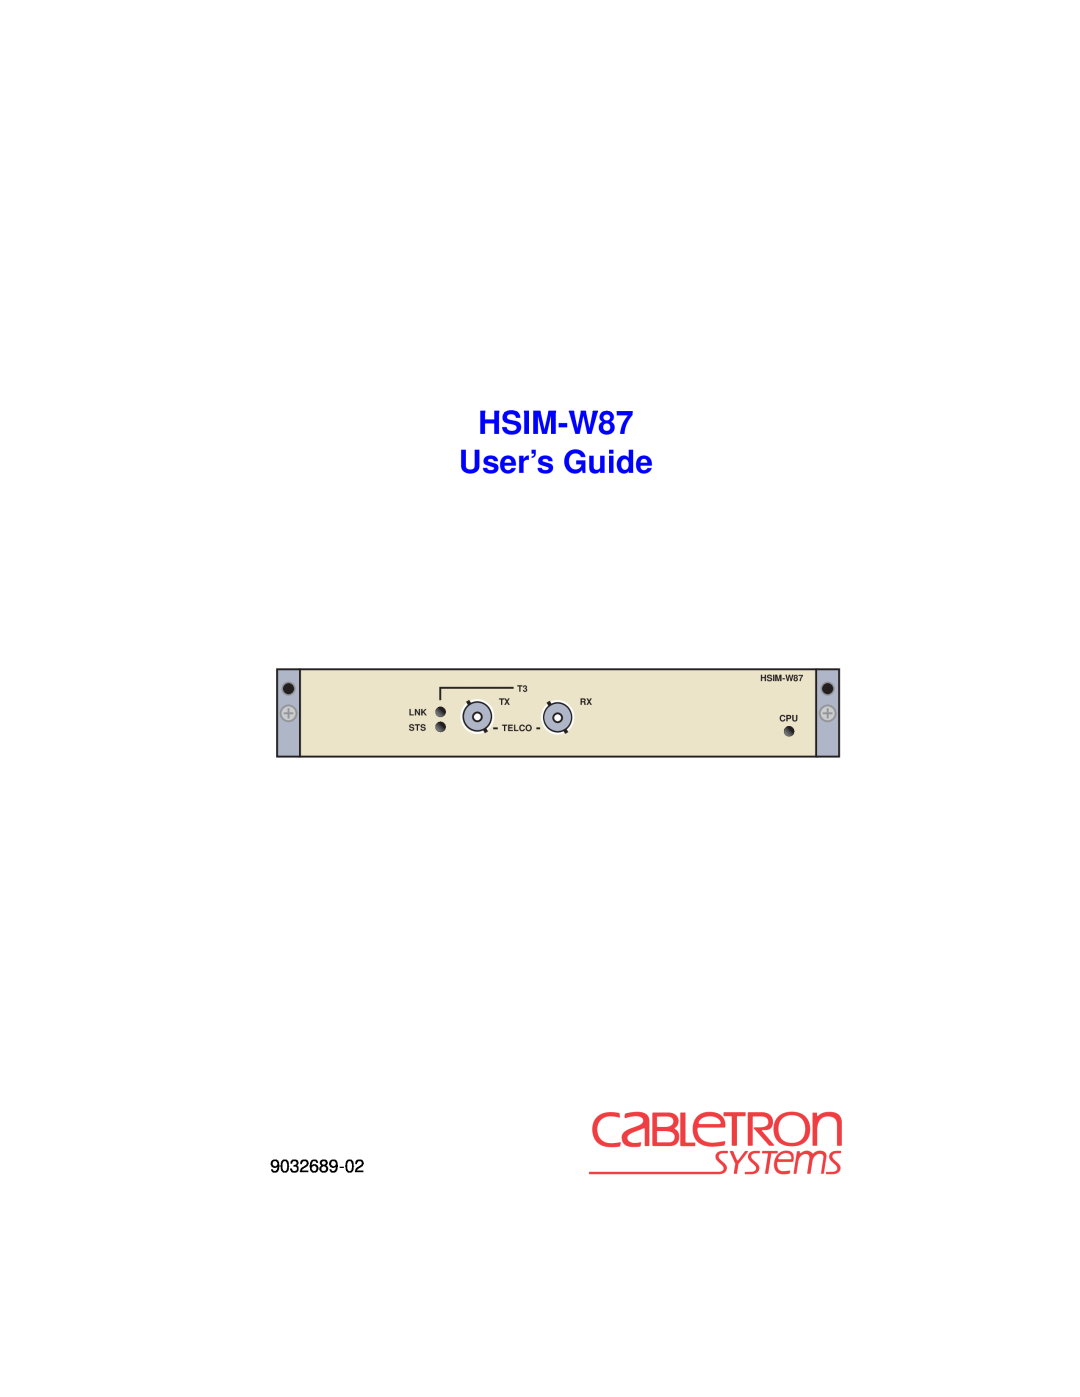 Cabletron Systems manual HSIM-W87 User’s Guide, 9032689-02, HSIM-W87 T3 TXRX LNK CPU STSTELCO 